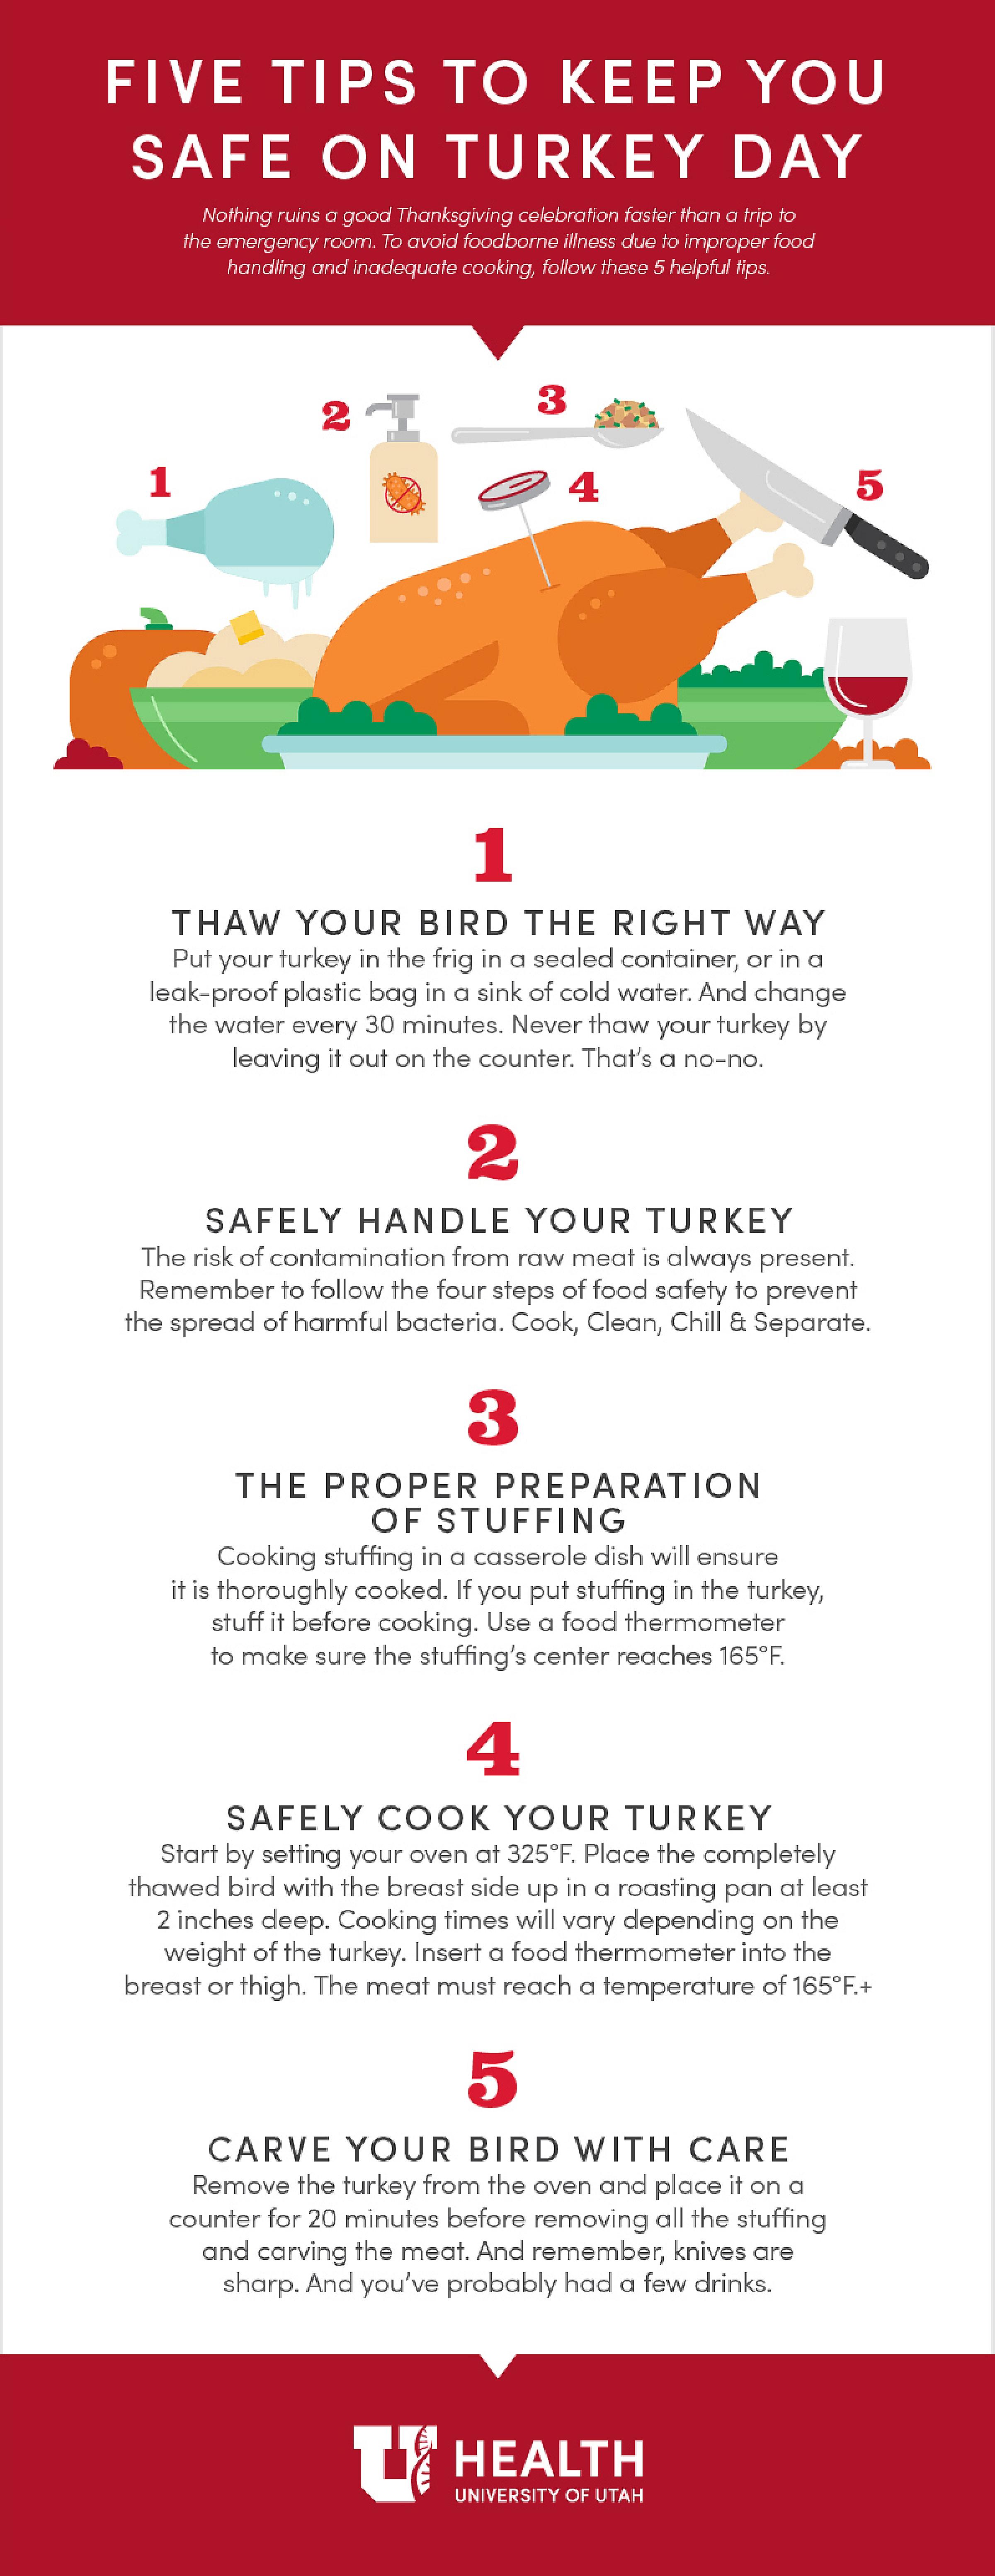 Five Tips to Keep You Safe on Turkey Day | University of Utah Health